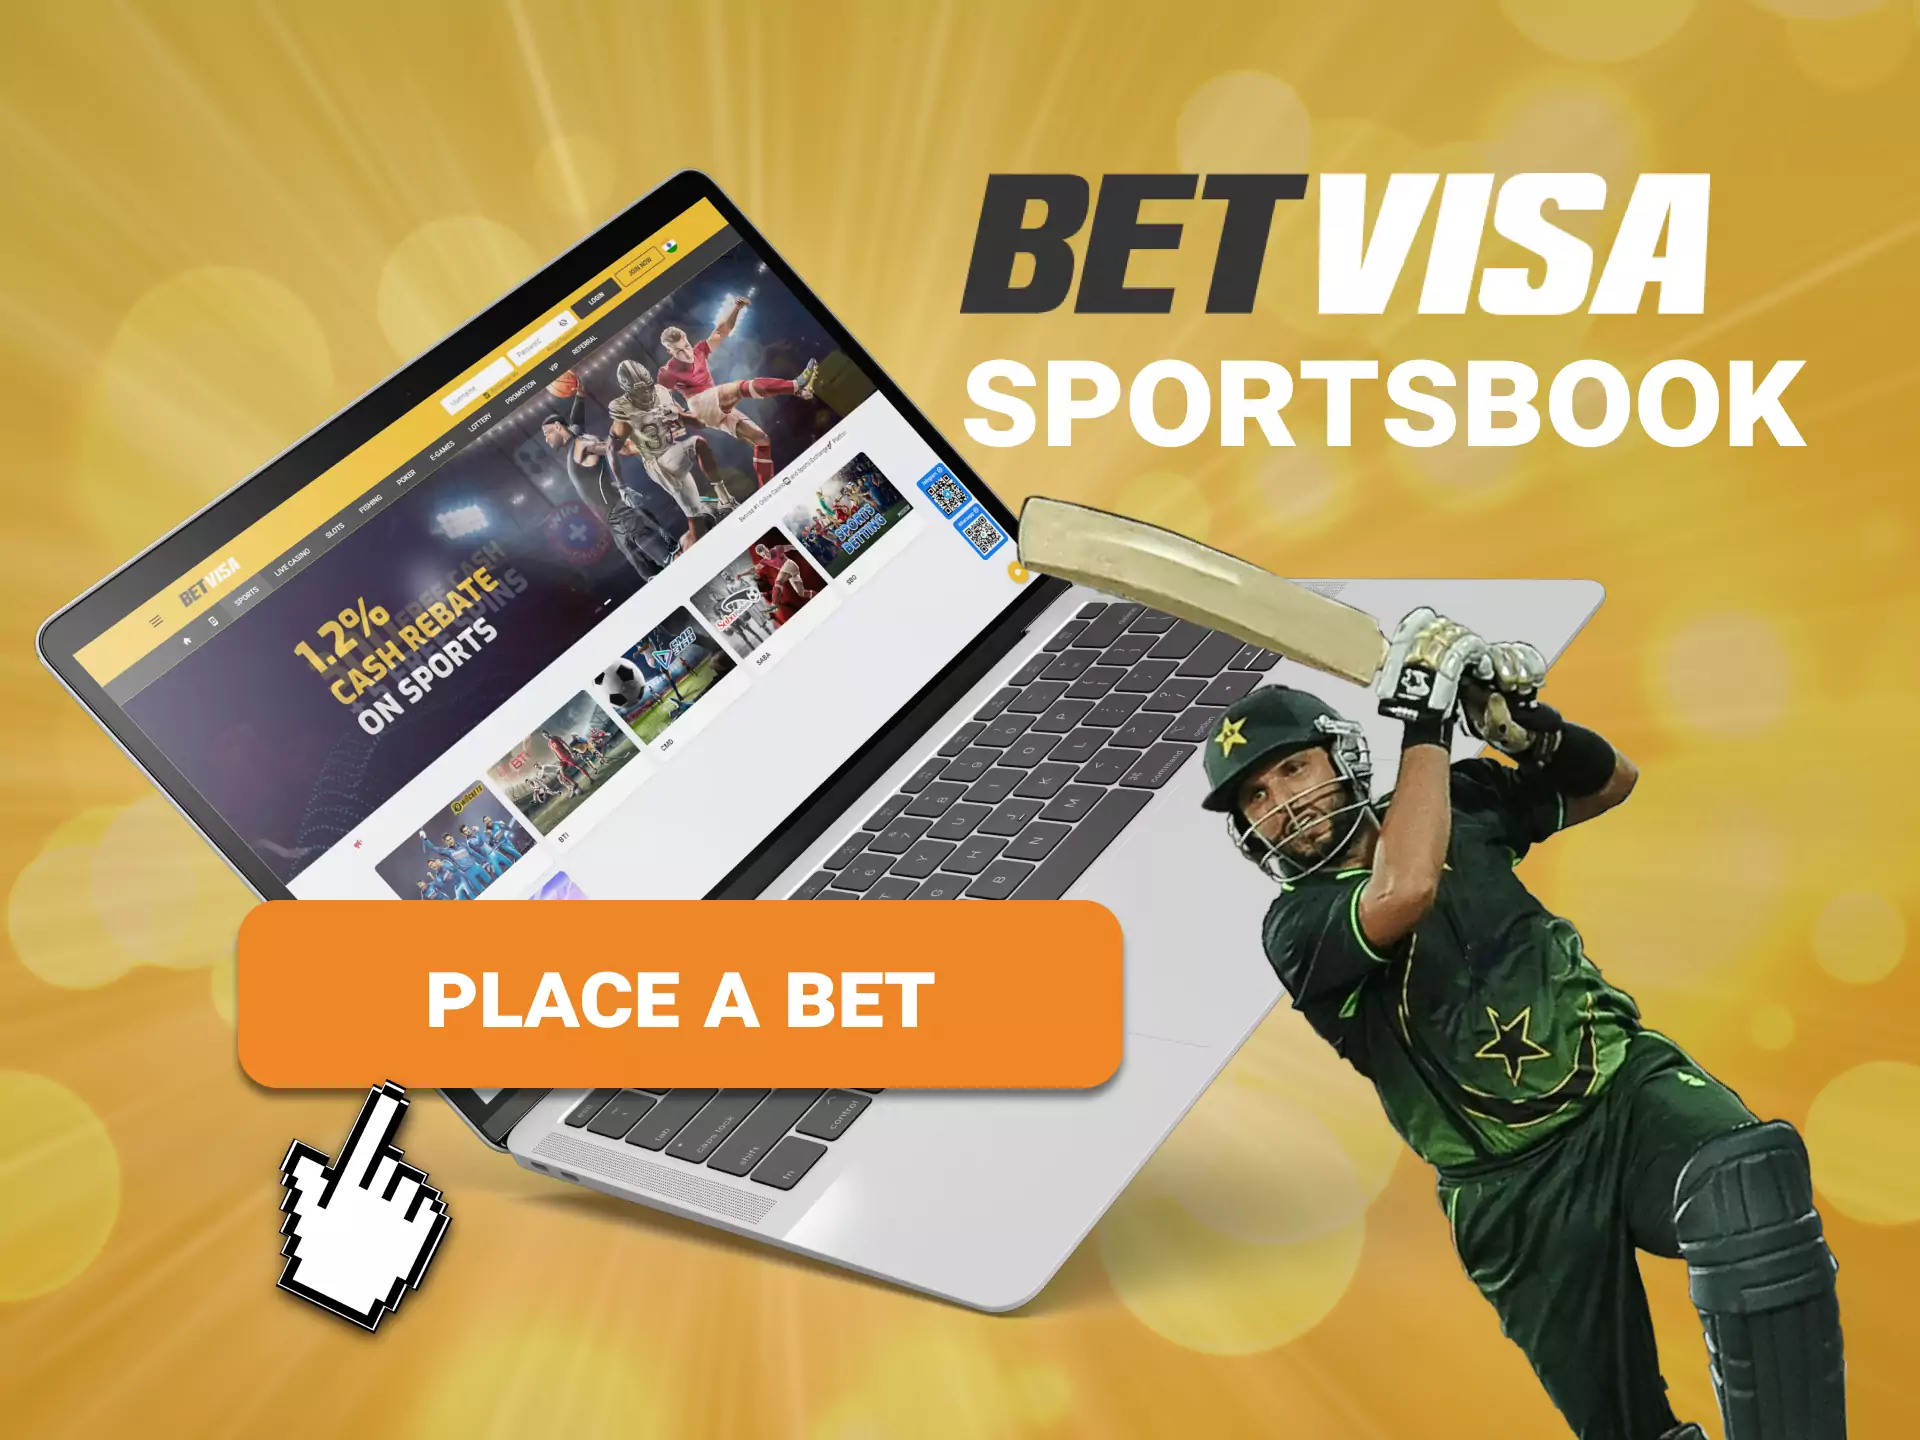 Betvisa provides betting on sports and esports matches.